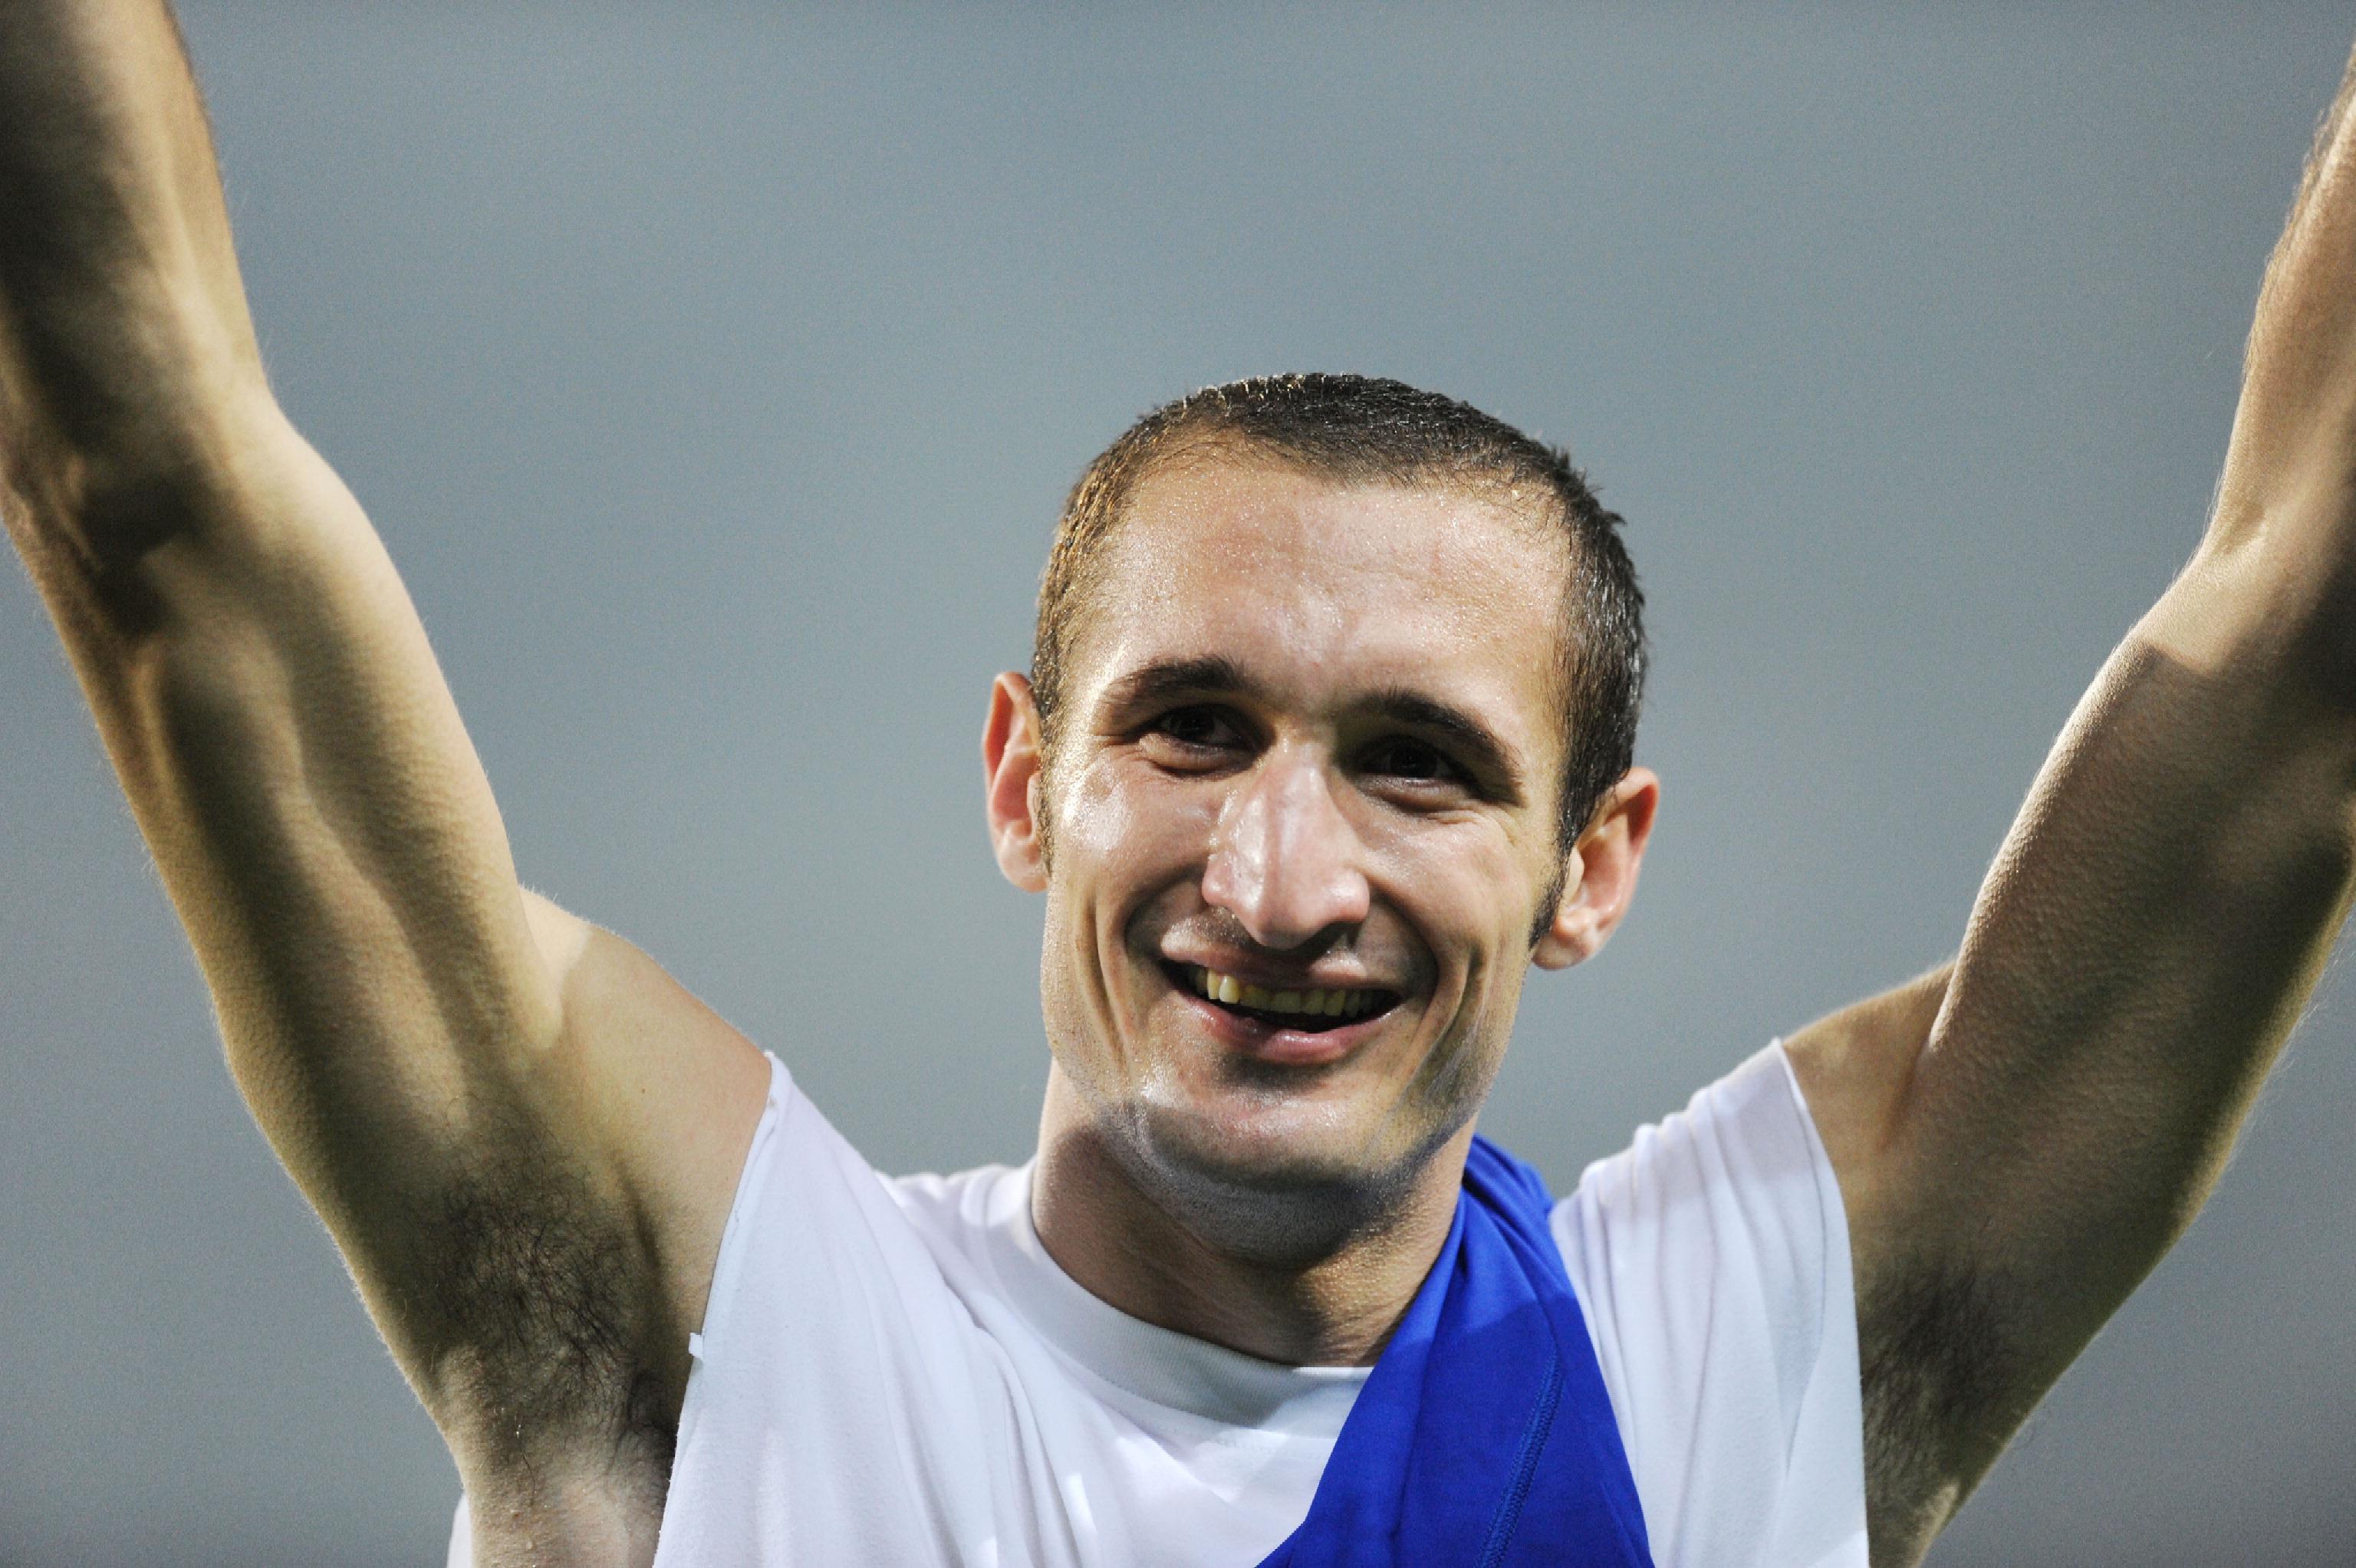 Charismatic: Chiellini loves world-class leader linked 